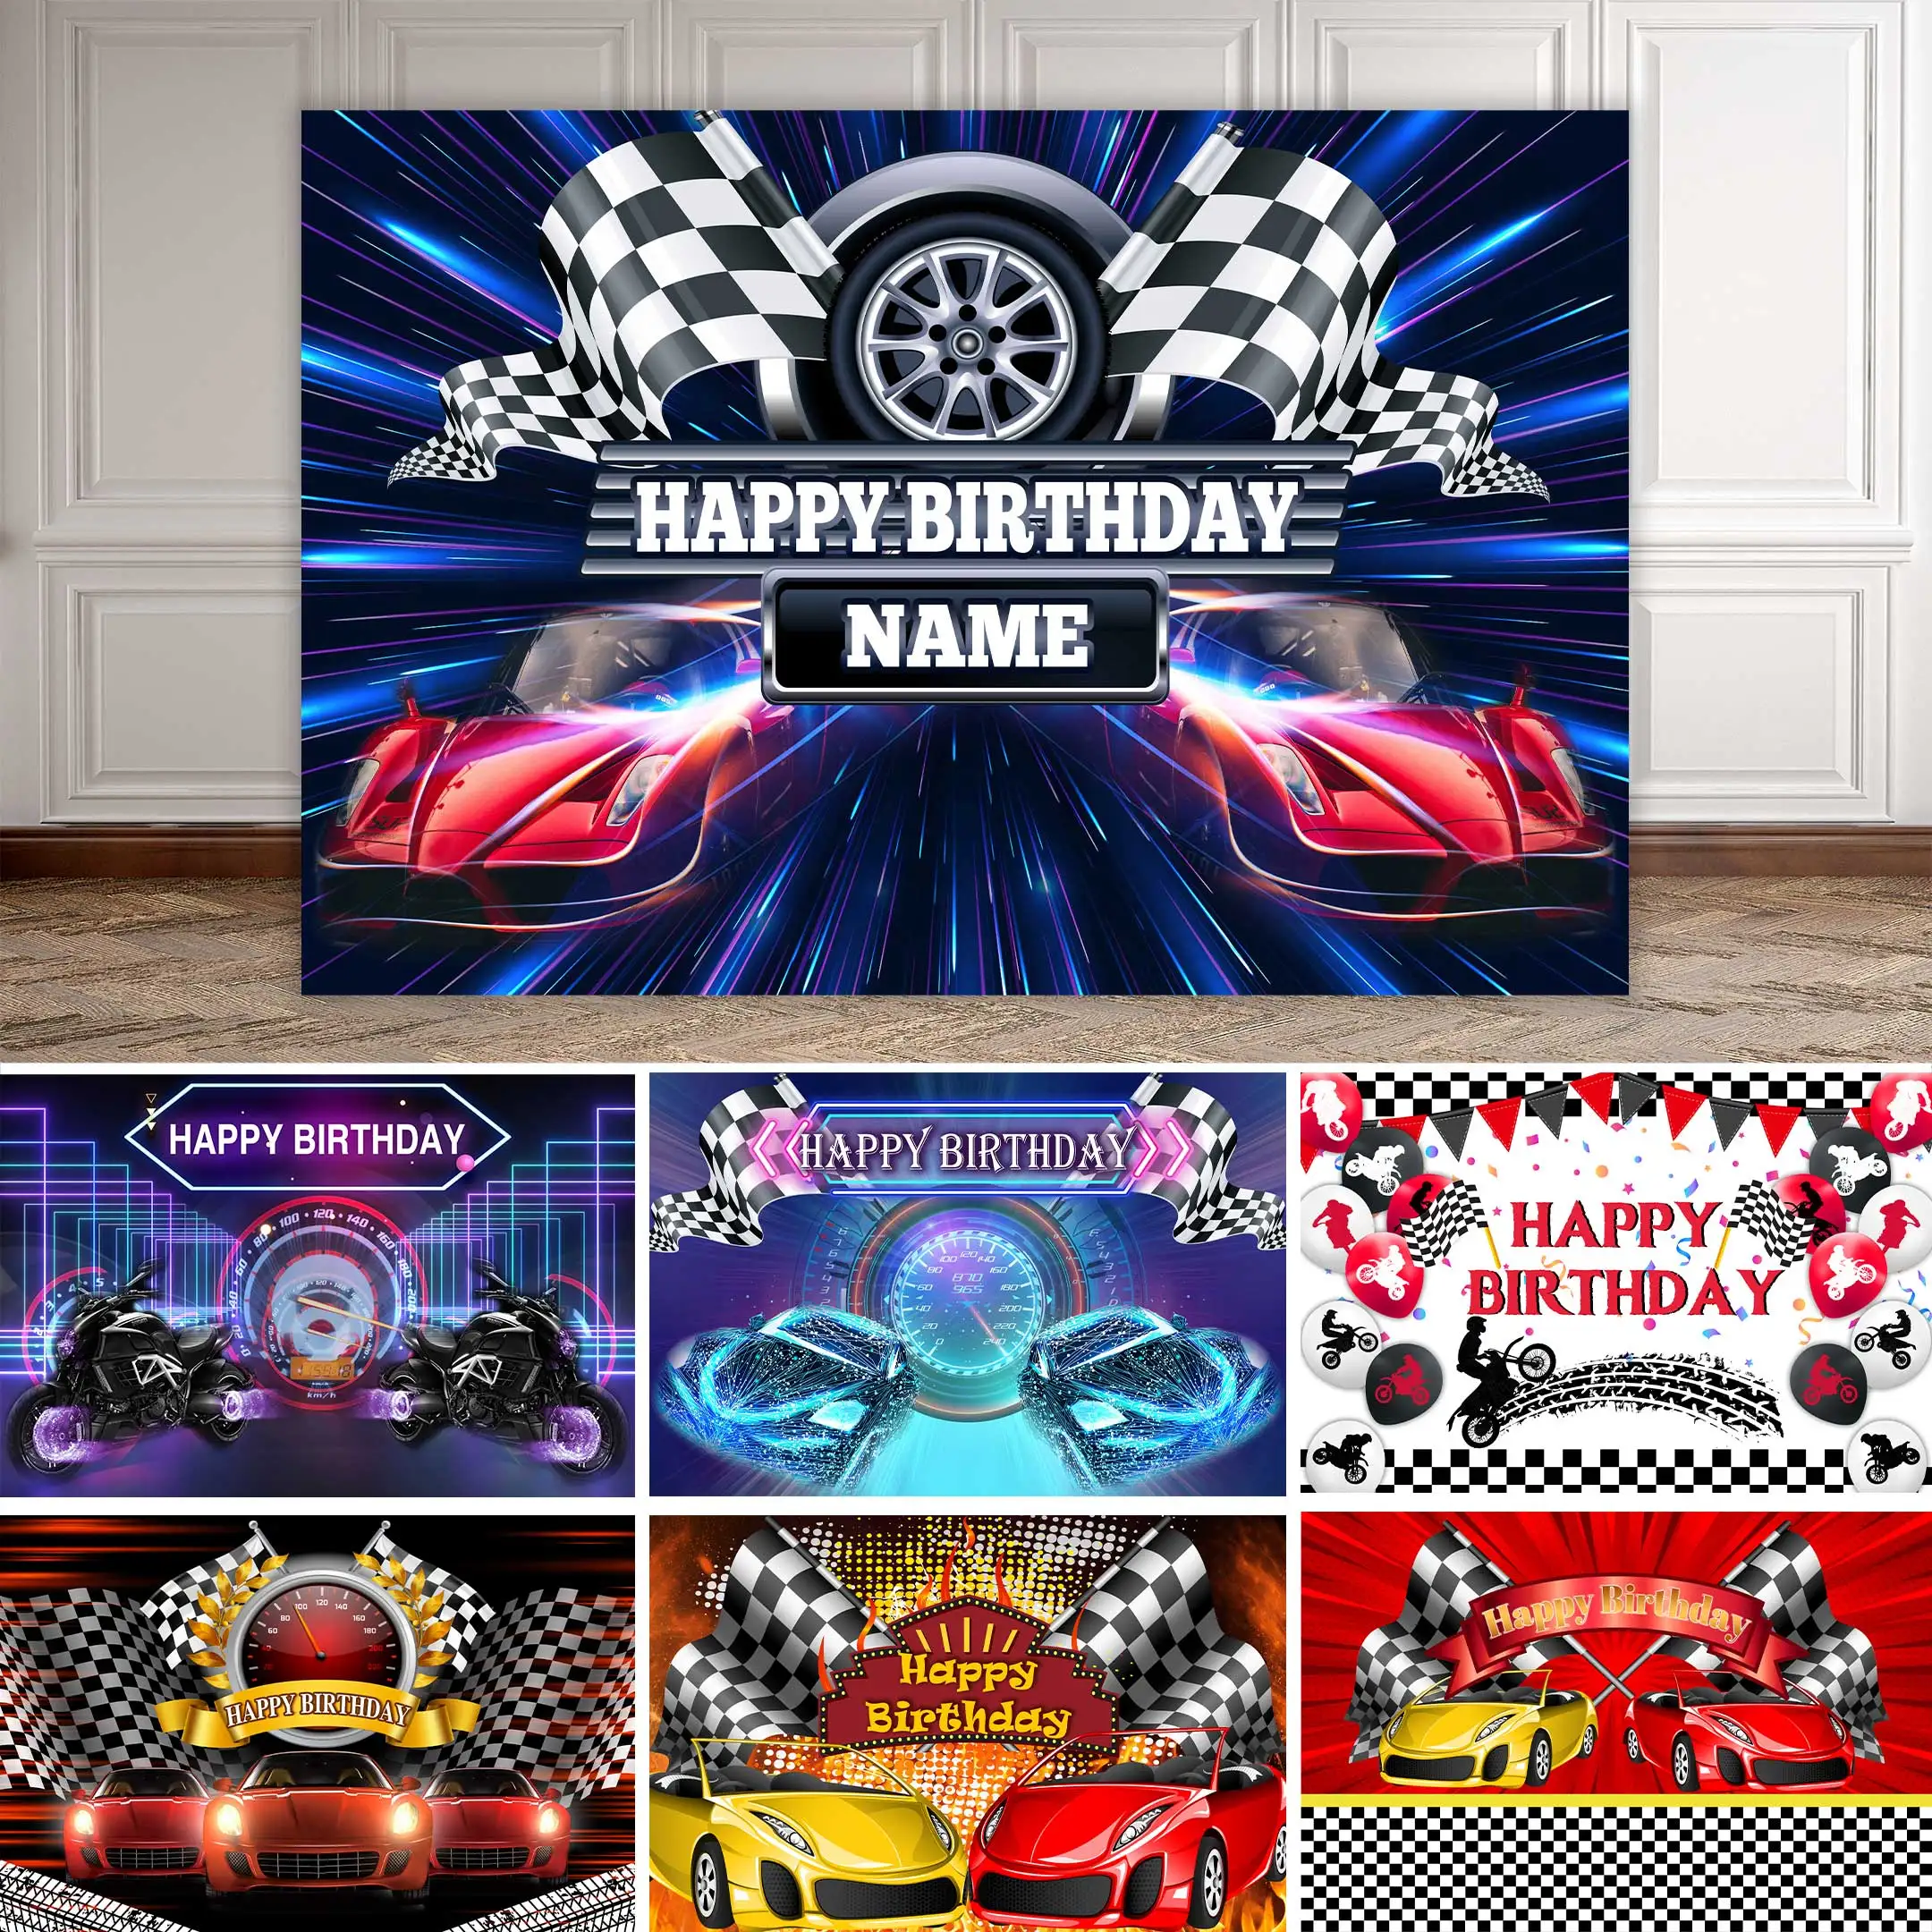 

NeoBack Customized Race Car Birthday Backdrop Boy Motorcycle Racing Two Fast Children Party Decorations Background Photocall